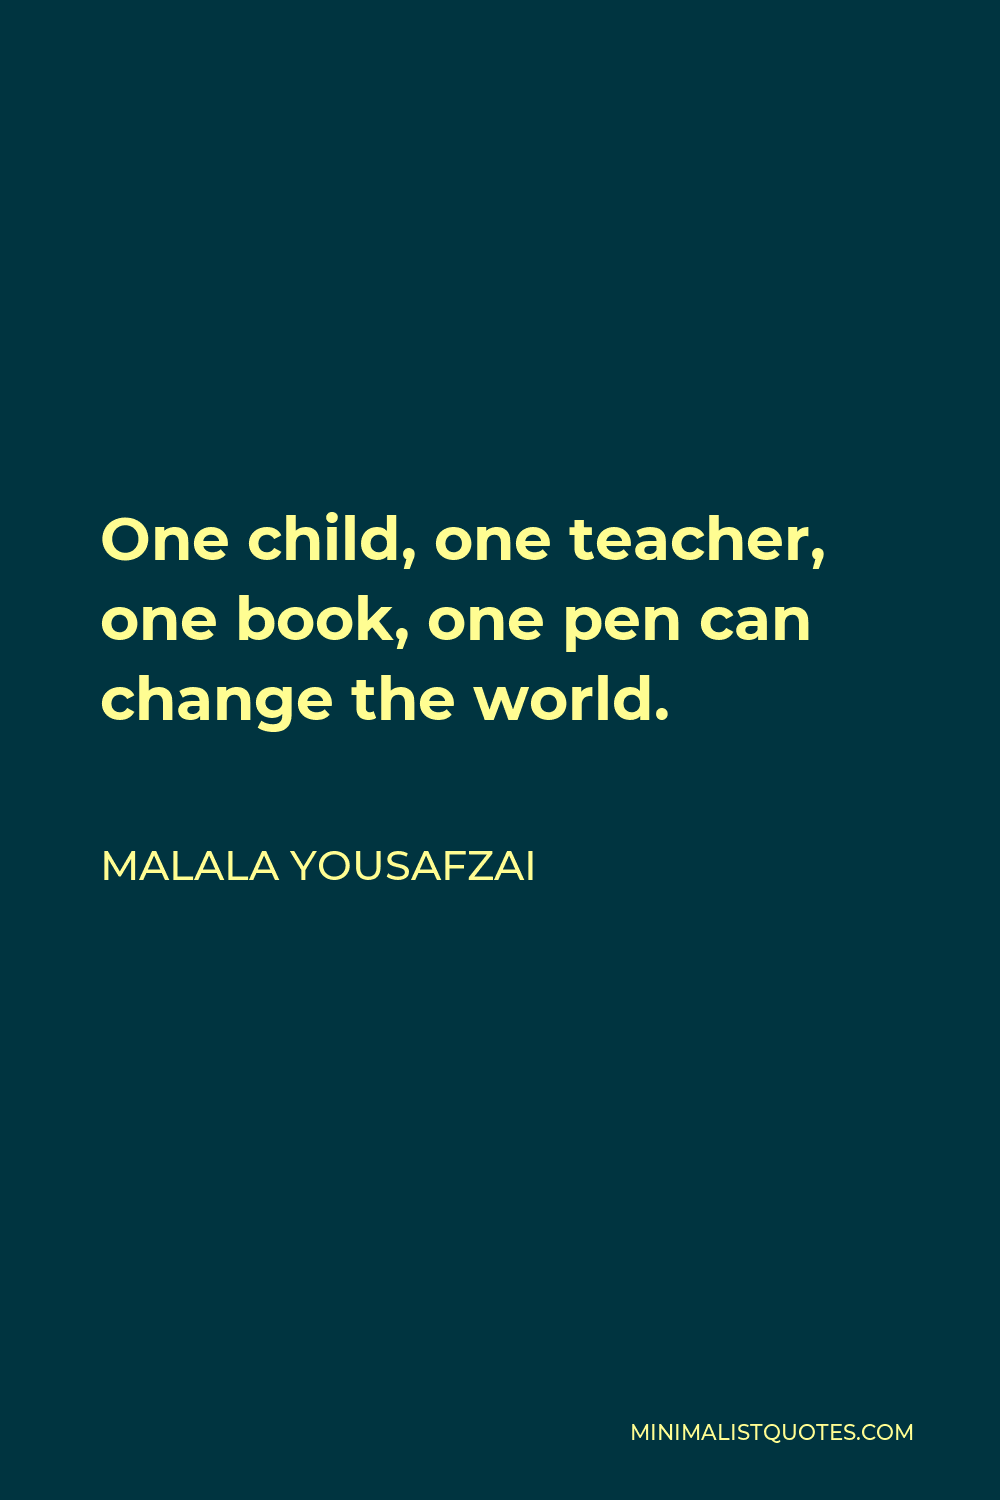 Malala Yousafzai Quote - One child, one teacher, one book, one pen can change the world.